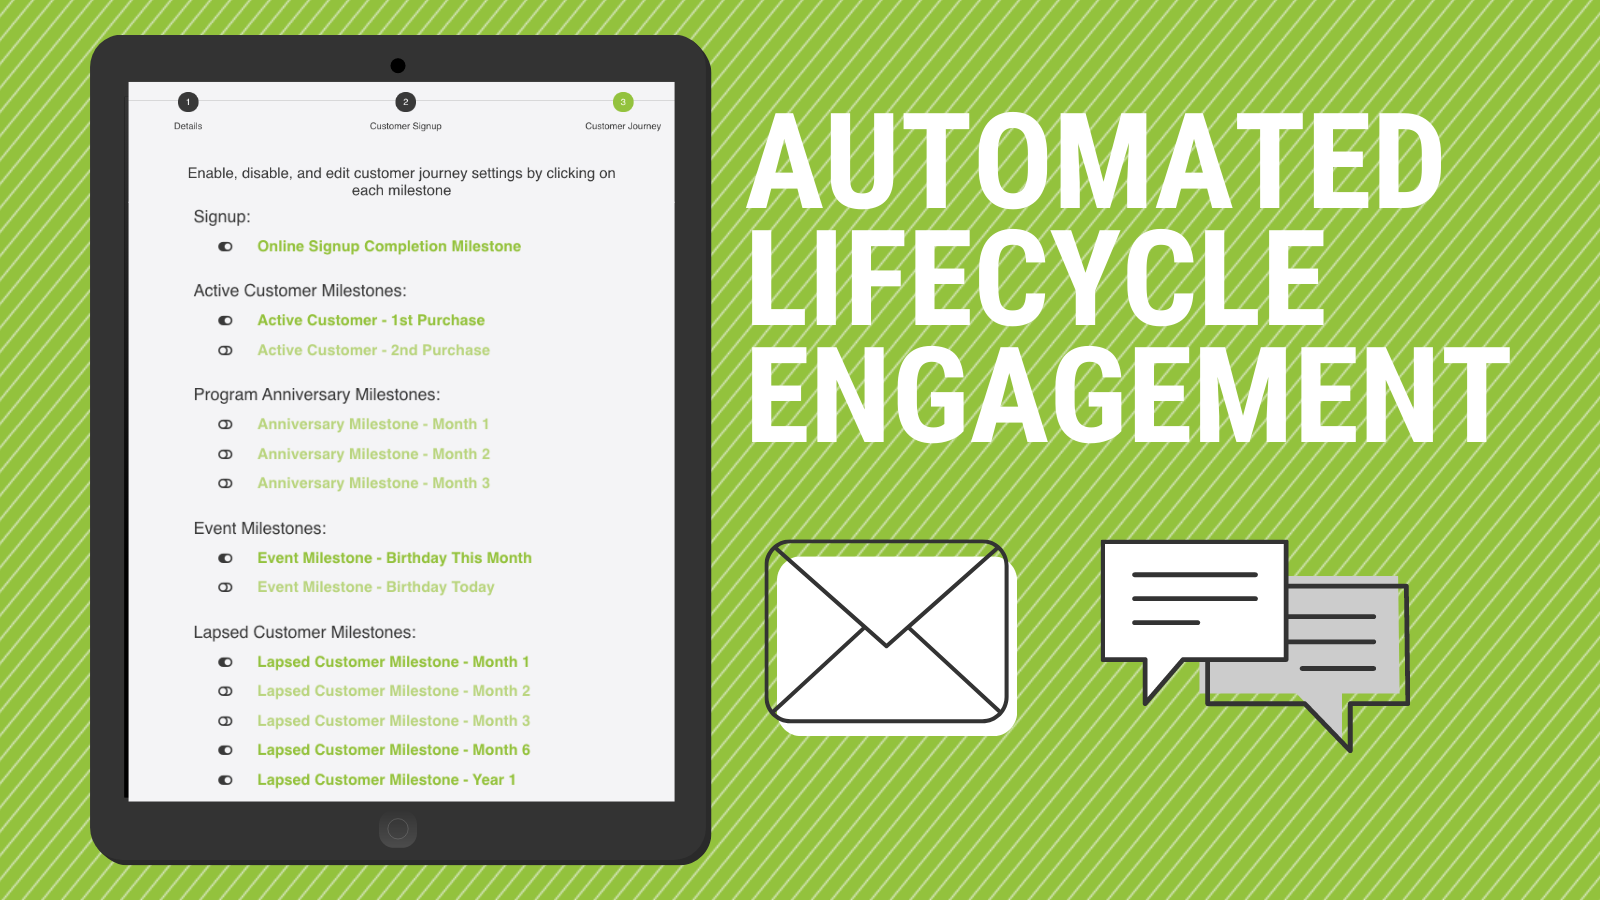 Automatisiertes Lifecycle-Engagement